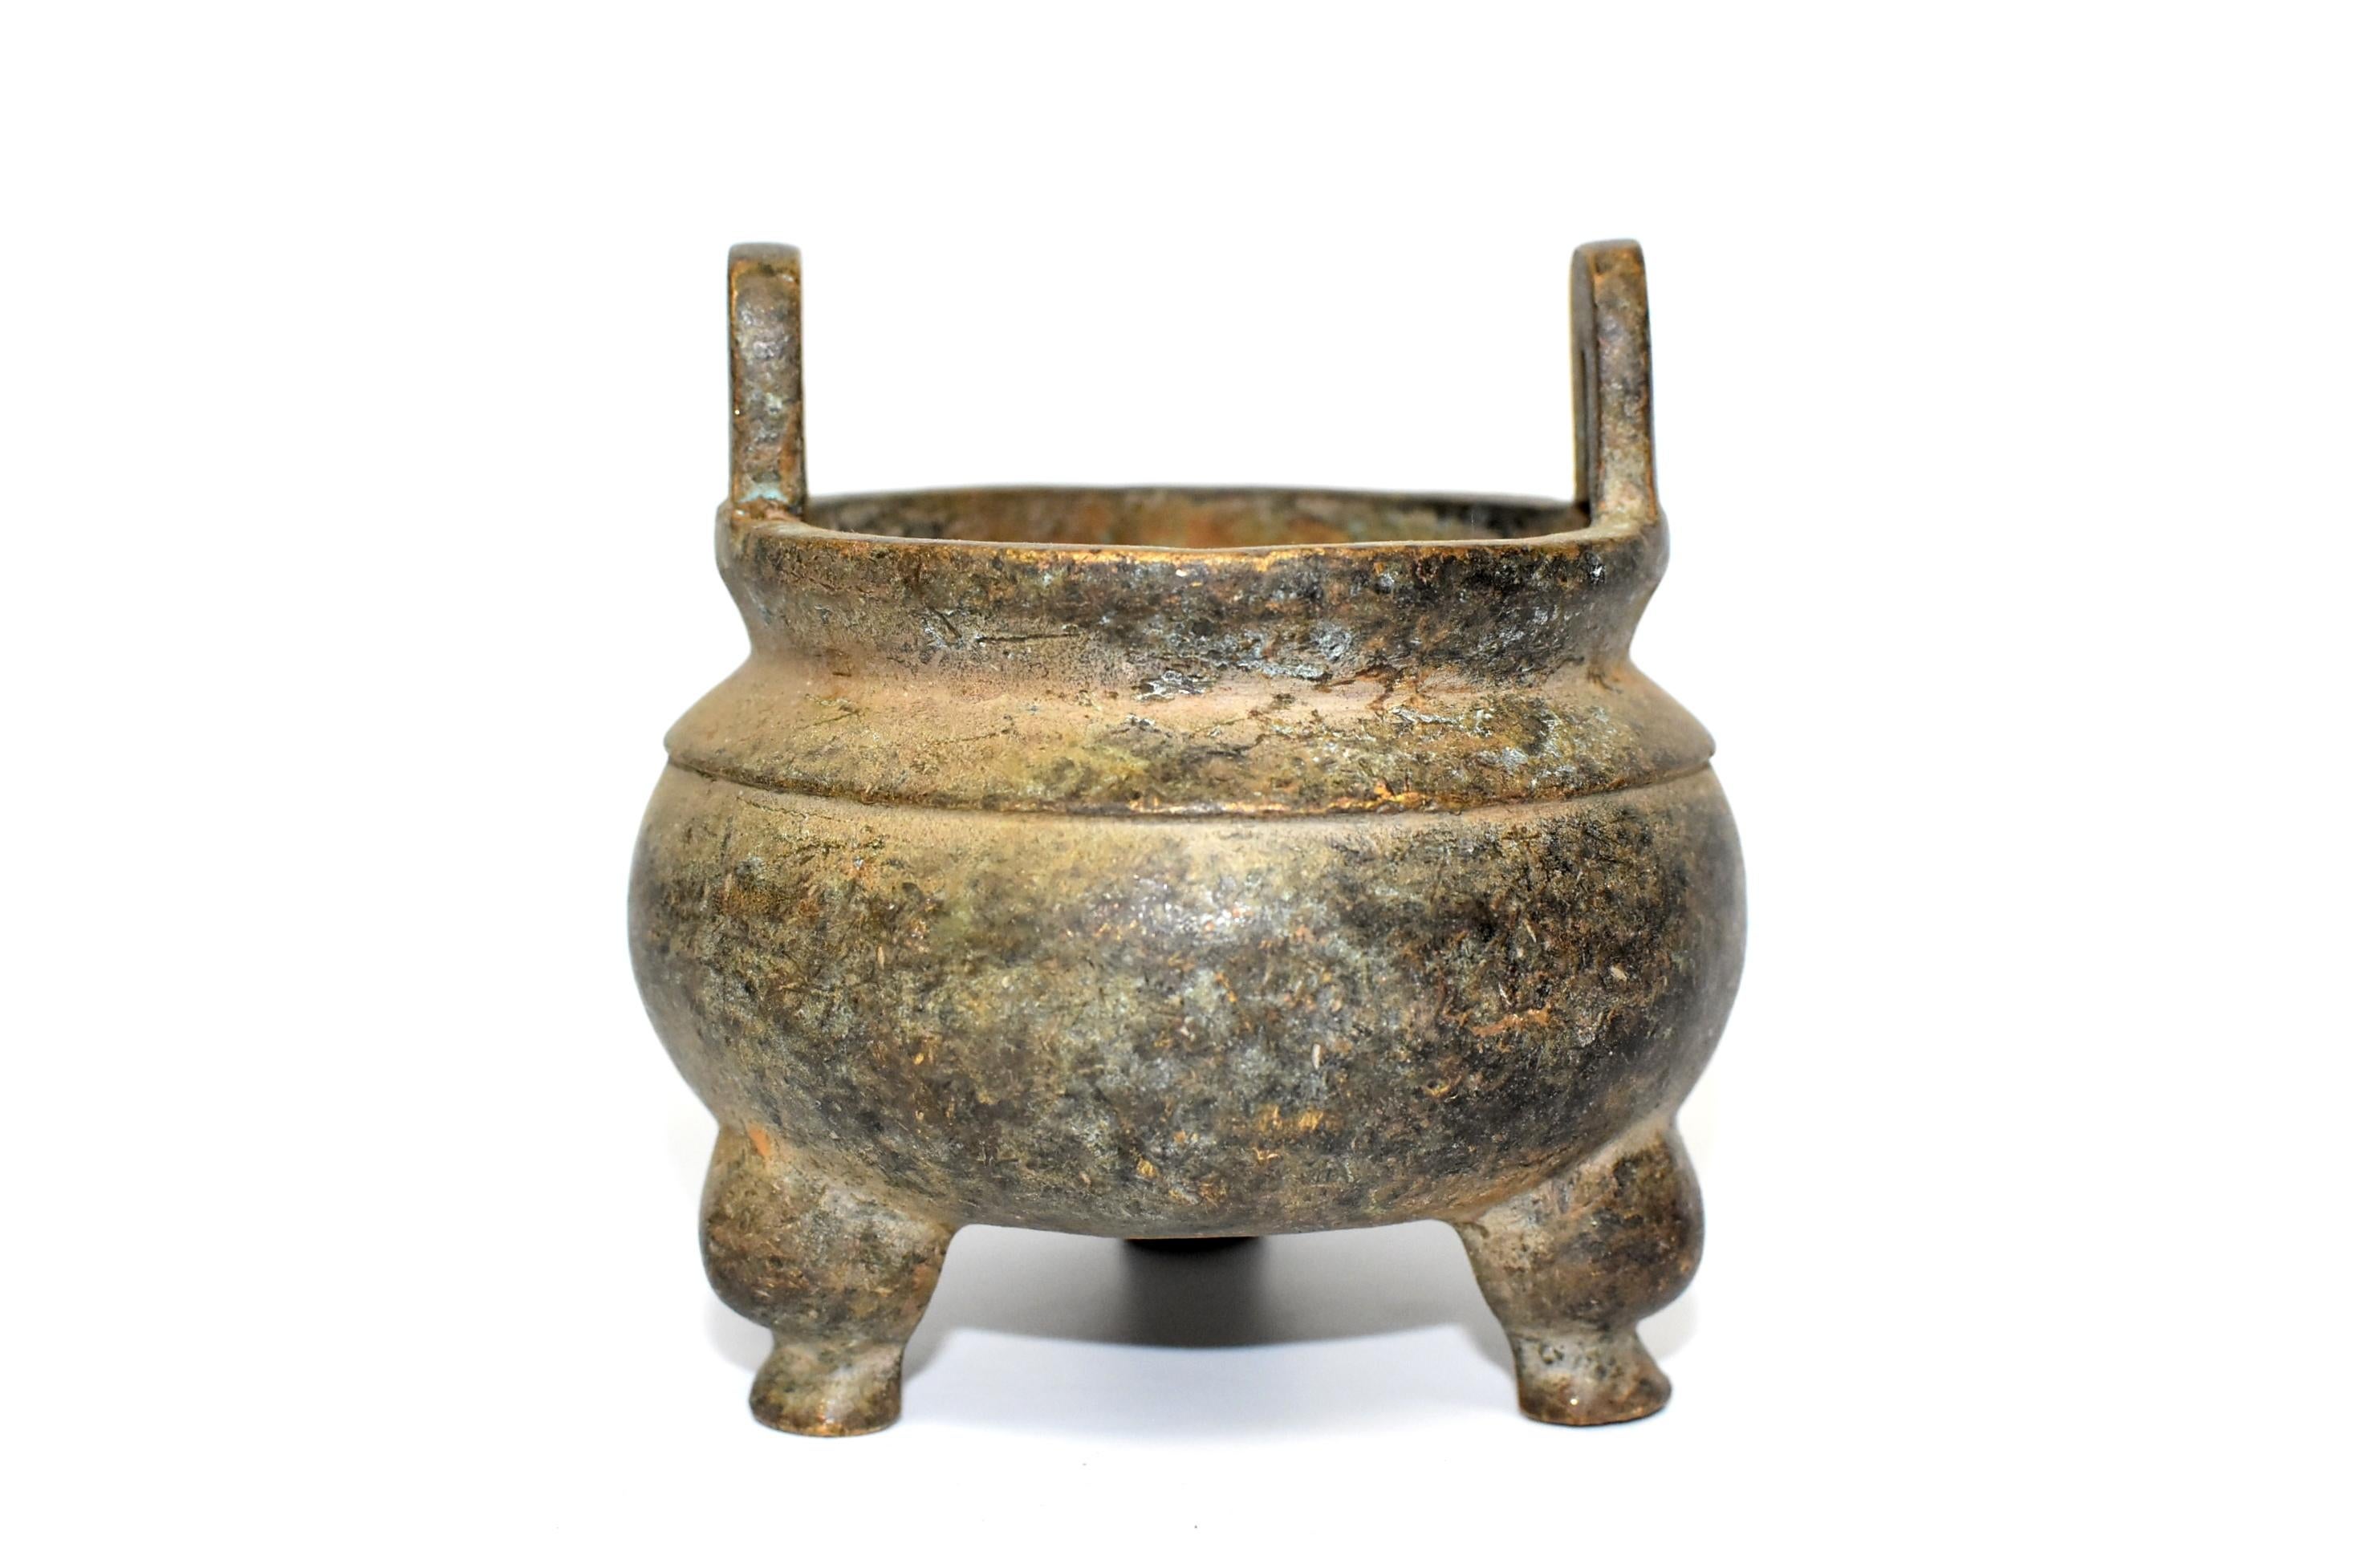 This rare collection consists of 3 antique bronze incense burners. Two of them are of a traditional bulbous shape. One of them has the form of a pomegranate. These small burners are substantial in weight, and finely made with great attentions paid